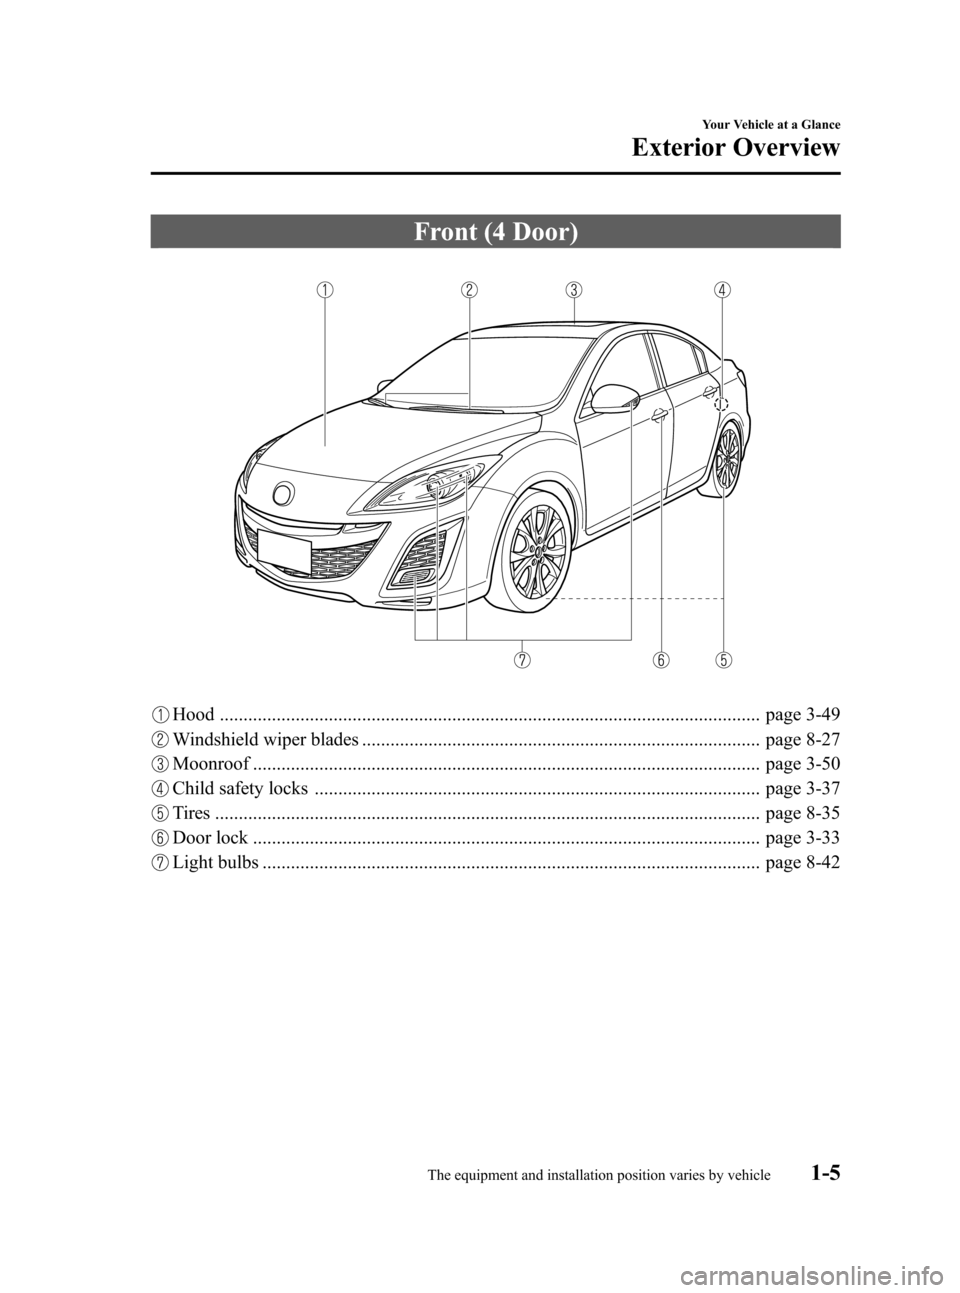 MAZDA MODEL 3 HATCHBACK 2011  Owners Manual (in English) Black plate (11,1)
Front (4 Door)
Hood .................................................................................................................. page 3-49
Windshield wiper blades ............